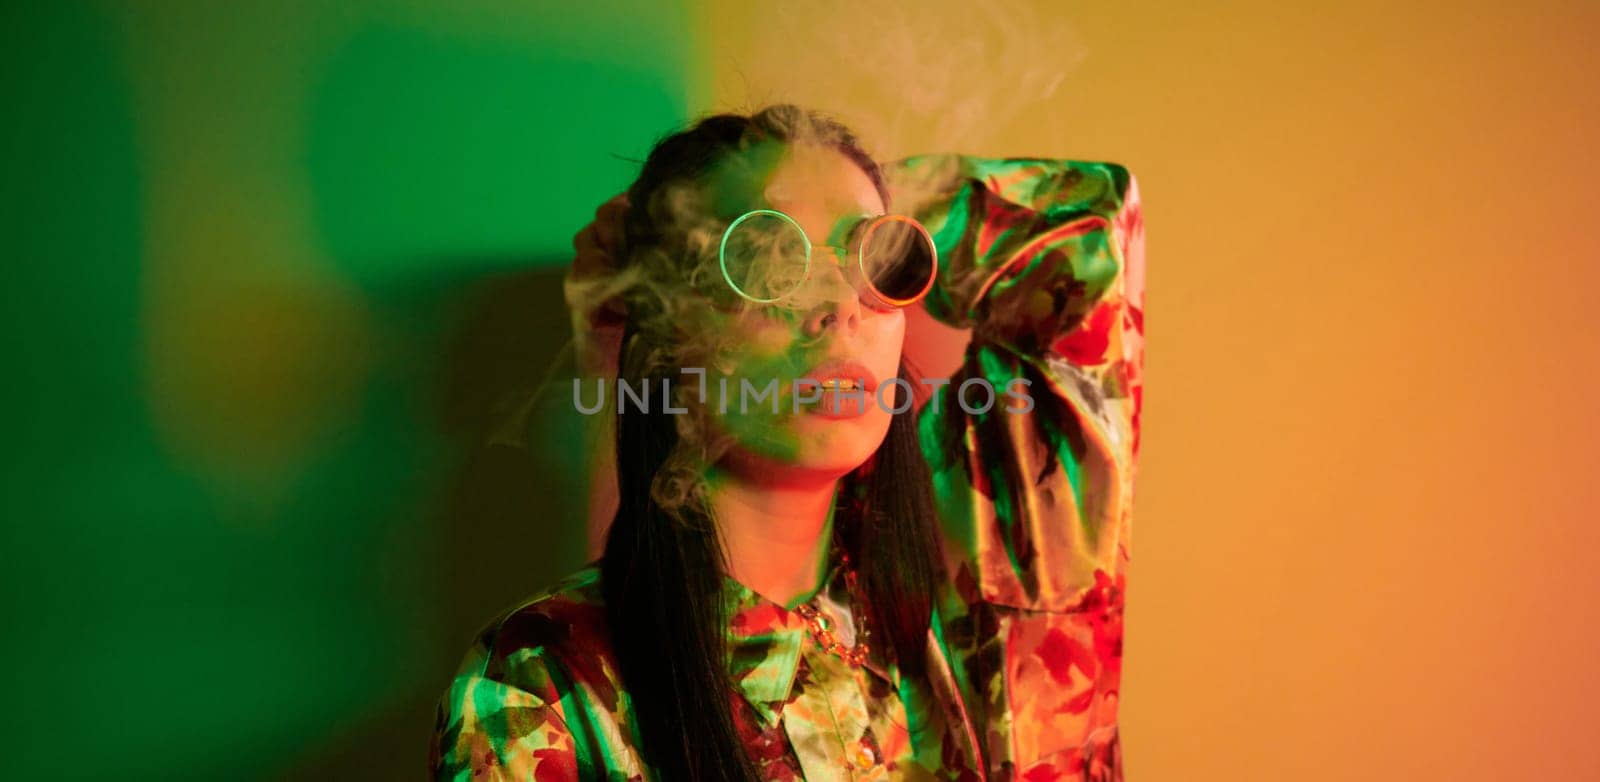 Smoking, activity. Fashionable young woman standing in the studio with neon light.